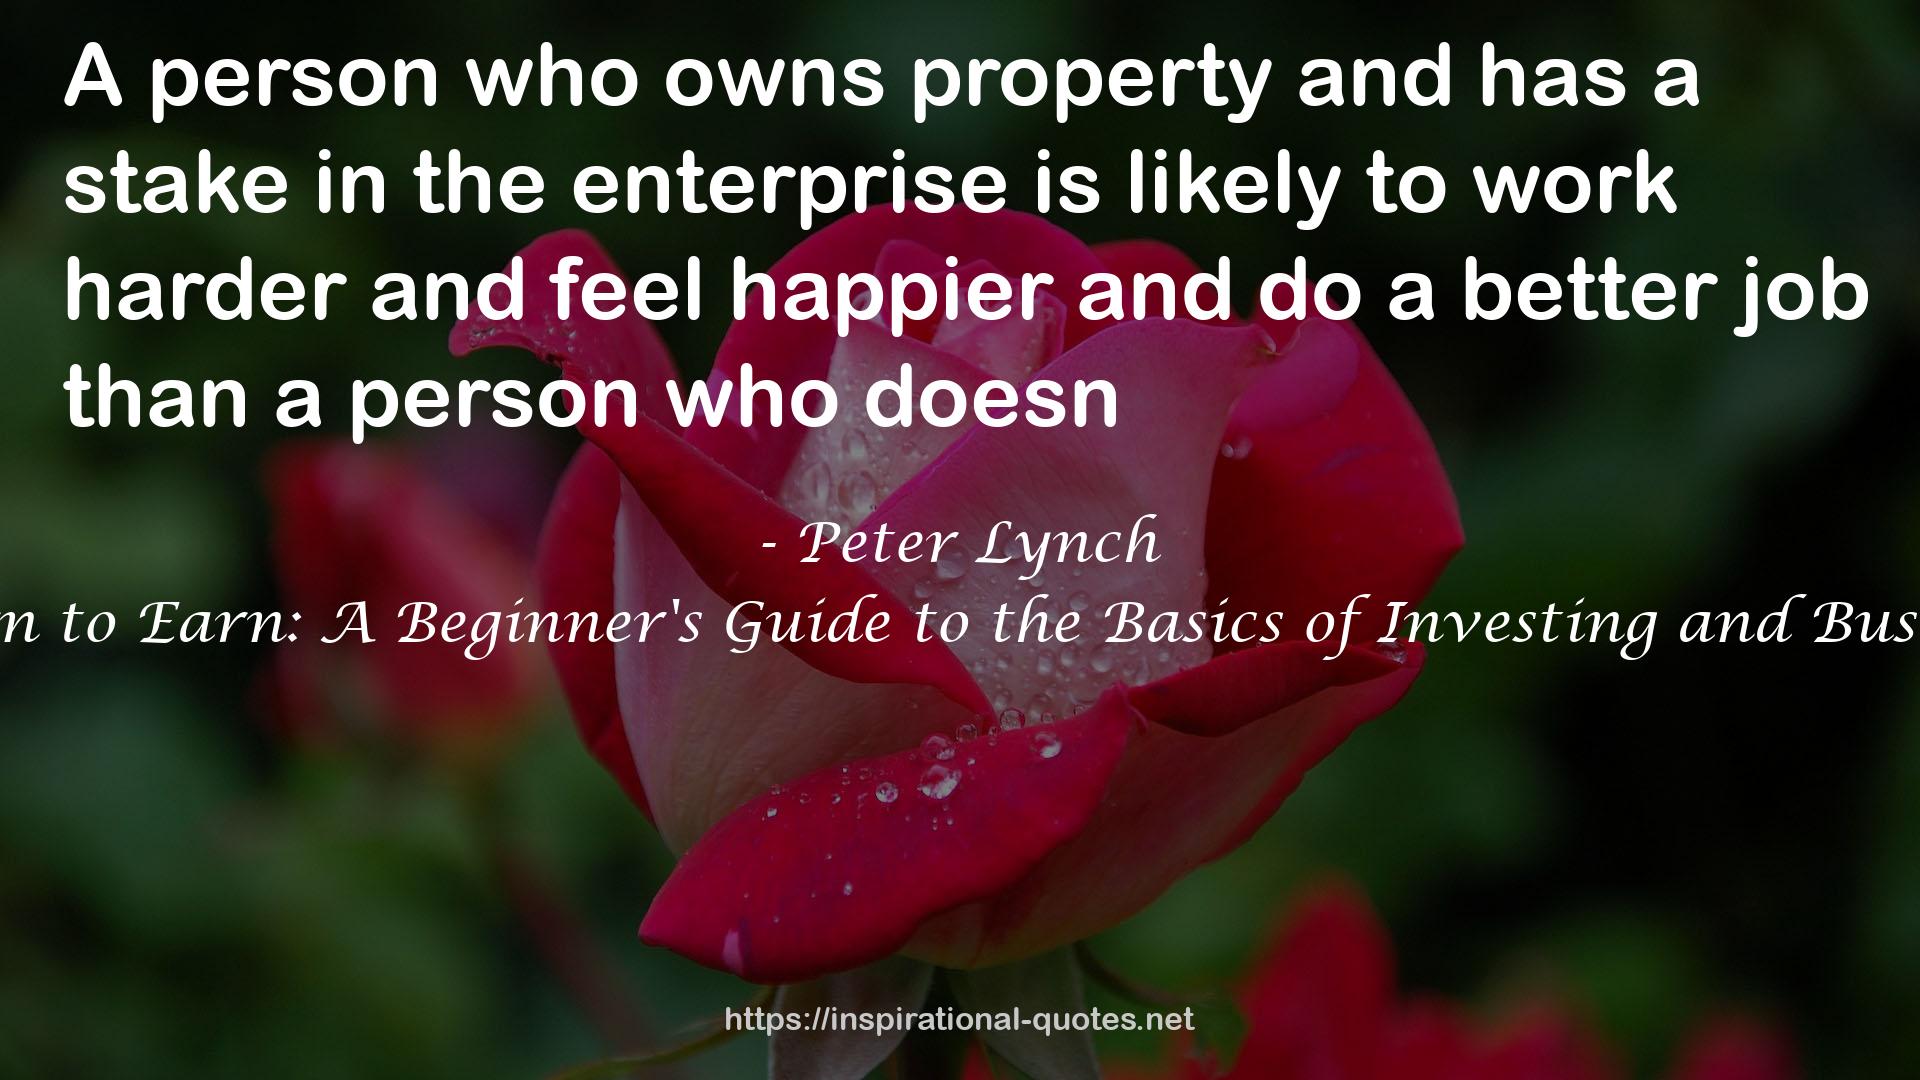 Peter Lynch QUOTES